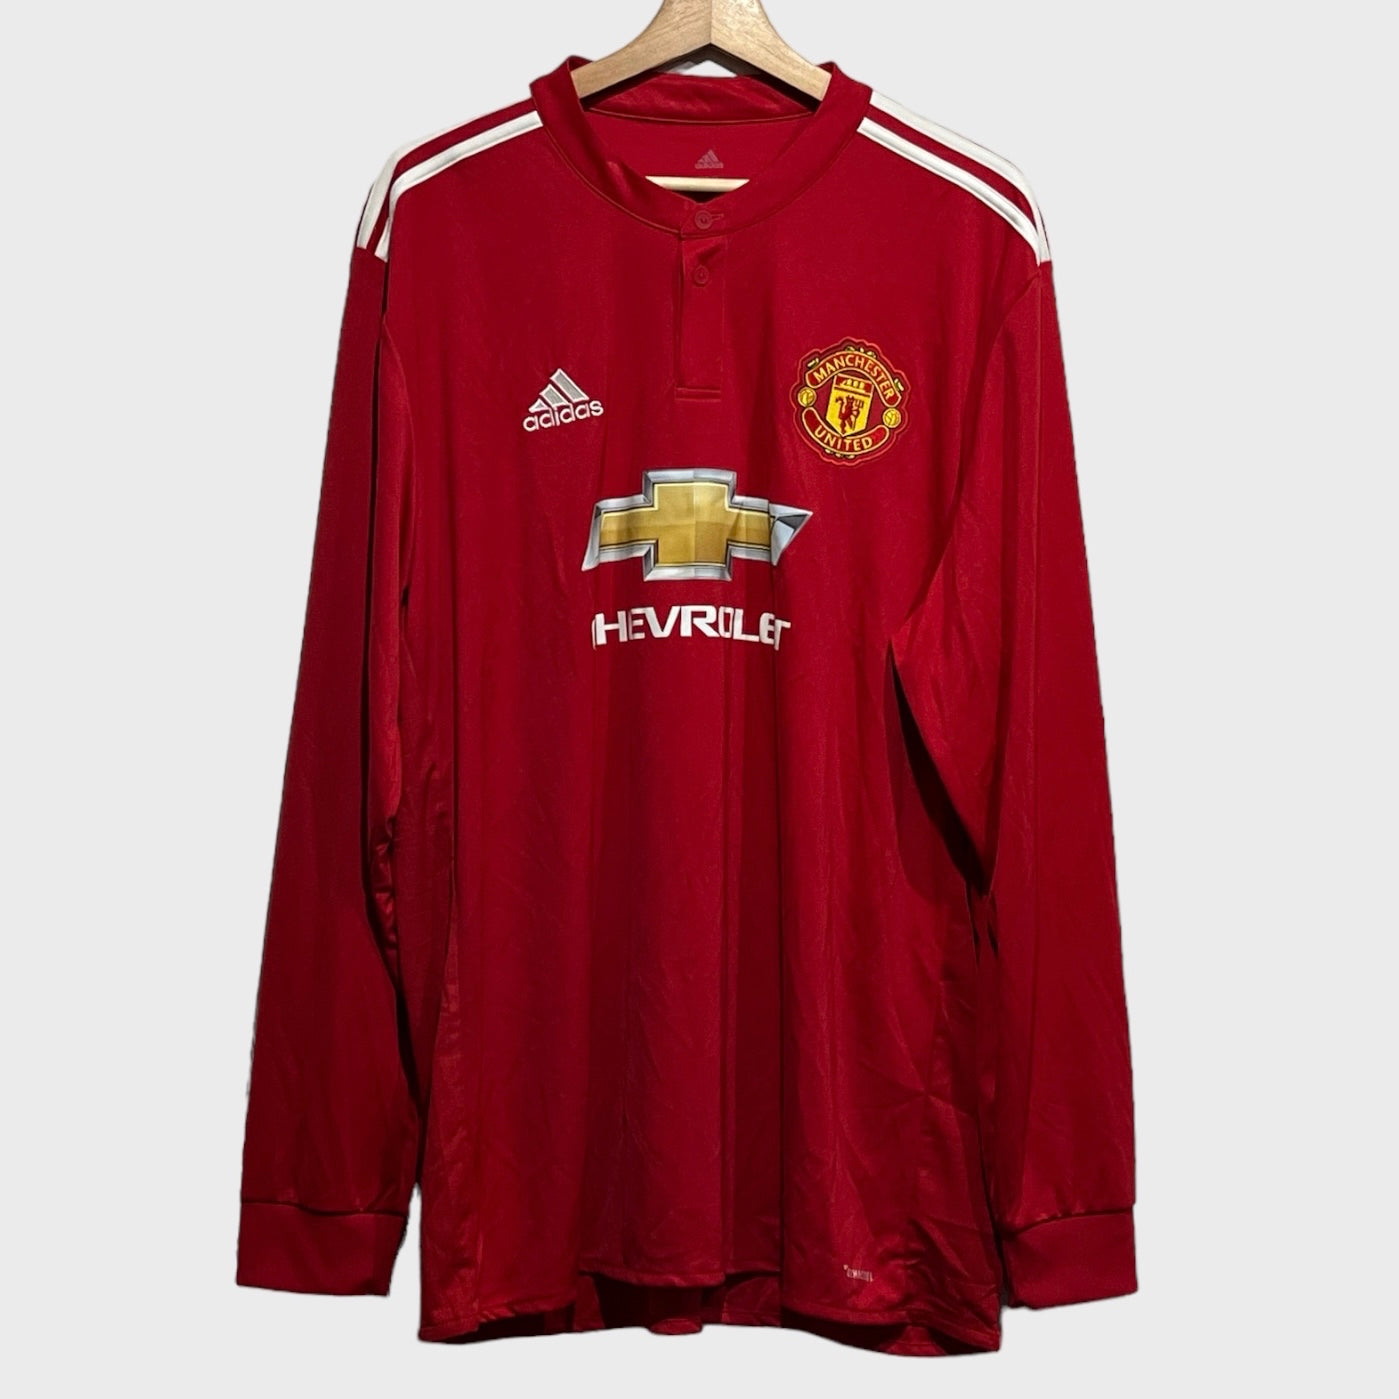 2017/18 Manchester United Home Jersey 2XL